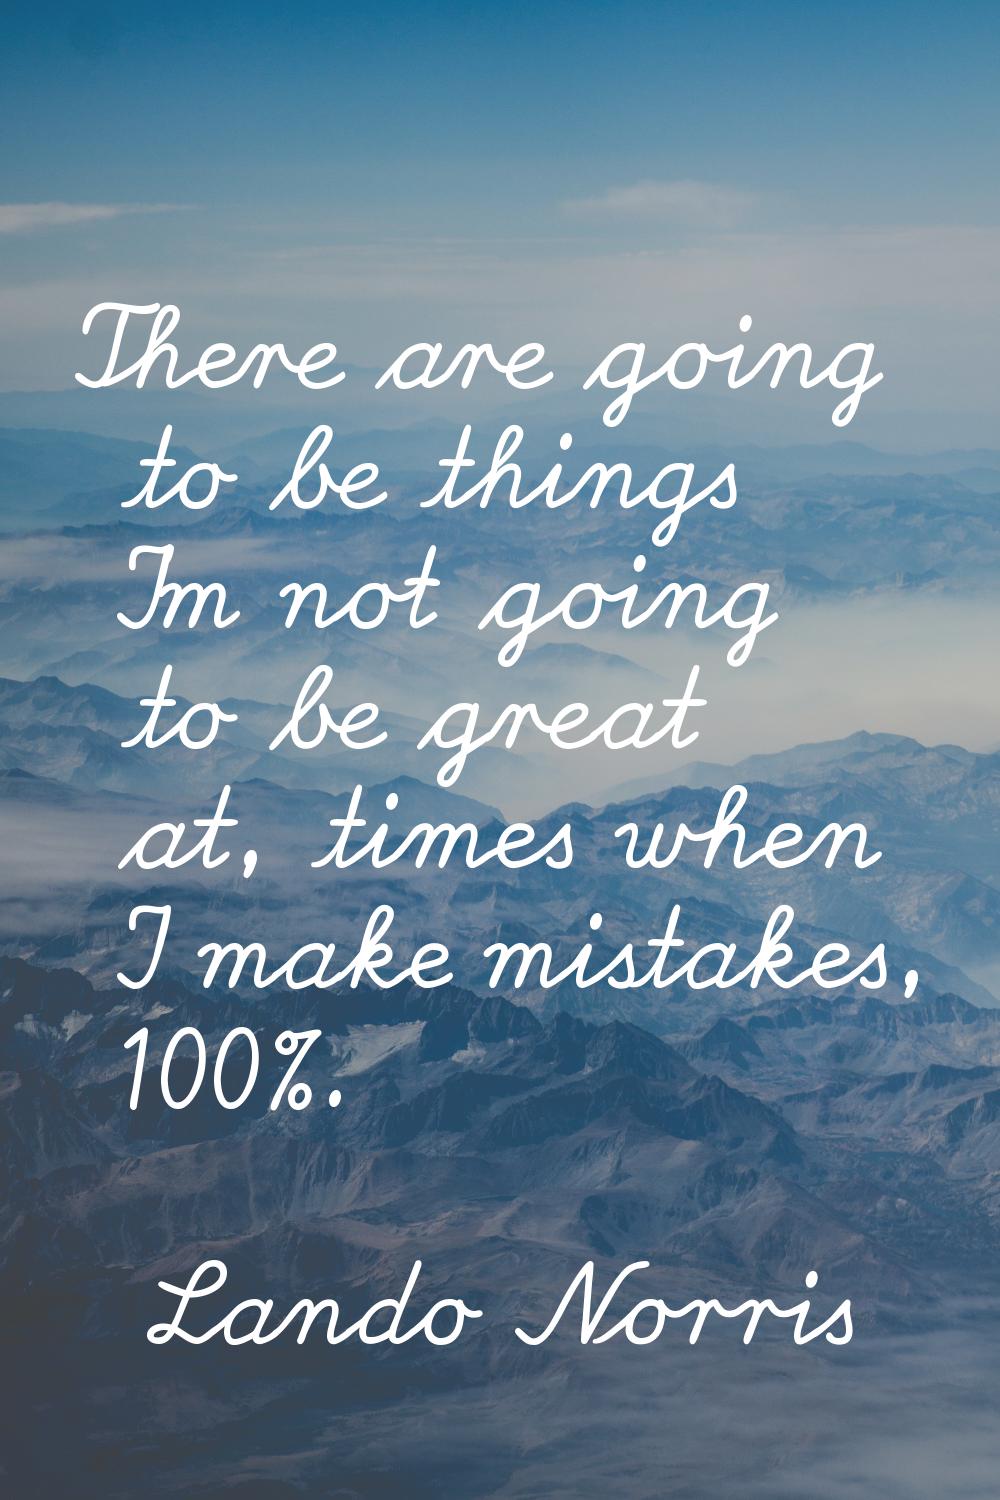 There are going to be things I'm not going to be great at, times when I make mistakes, 100%.